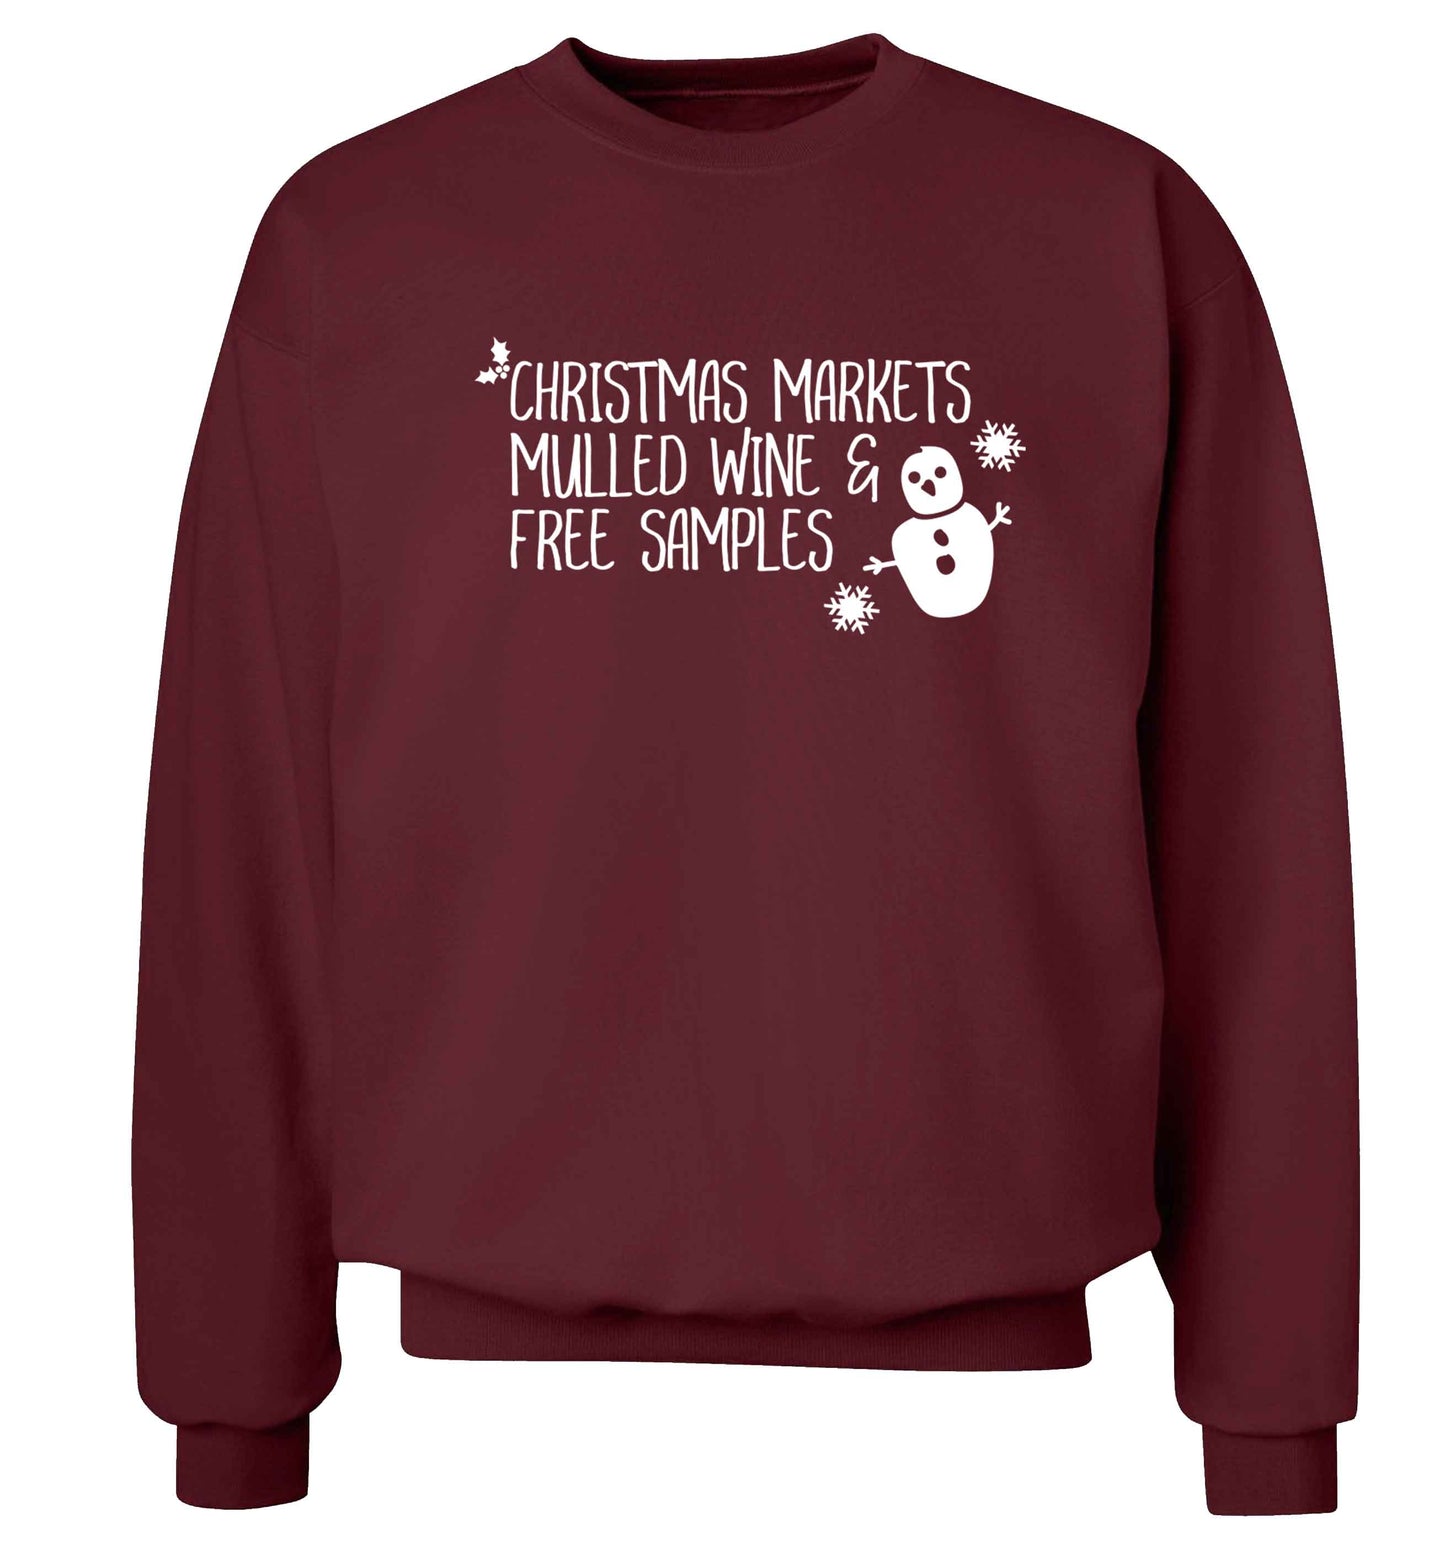 Christmas market mulled wine & free samples Adult's unisex maroon Sweater 2XL